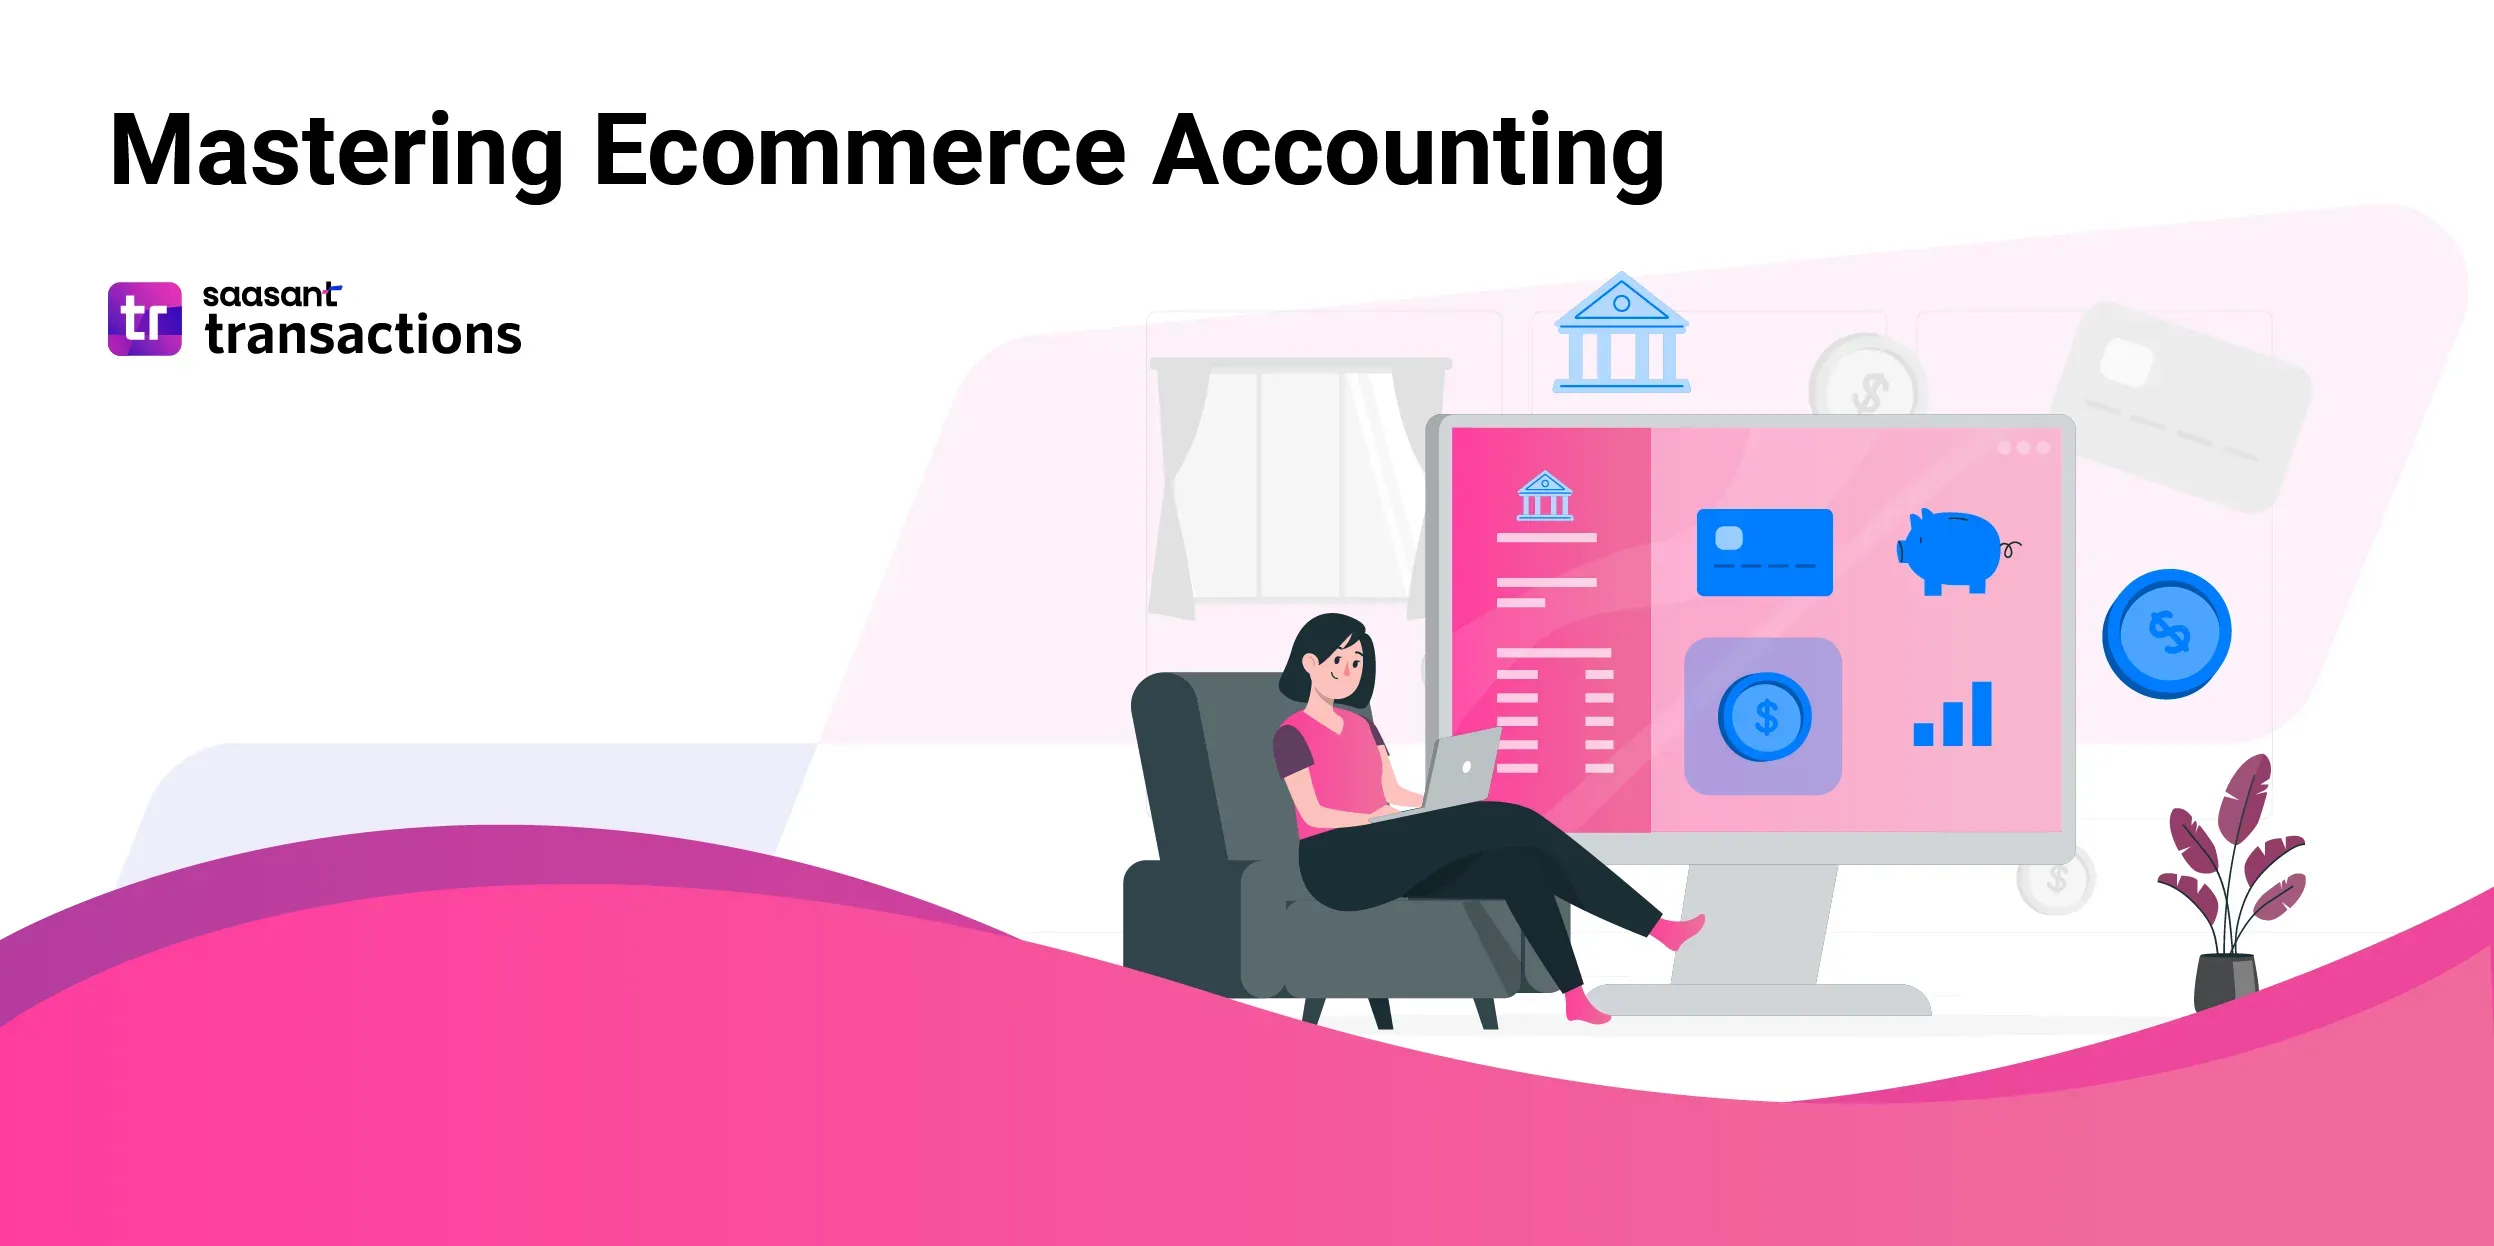 ECommerce Accounting: Strategies and Tools for Online Businesses